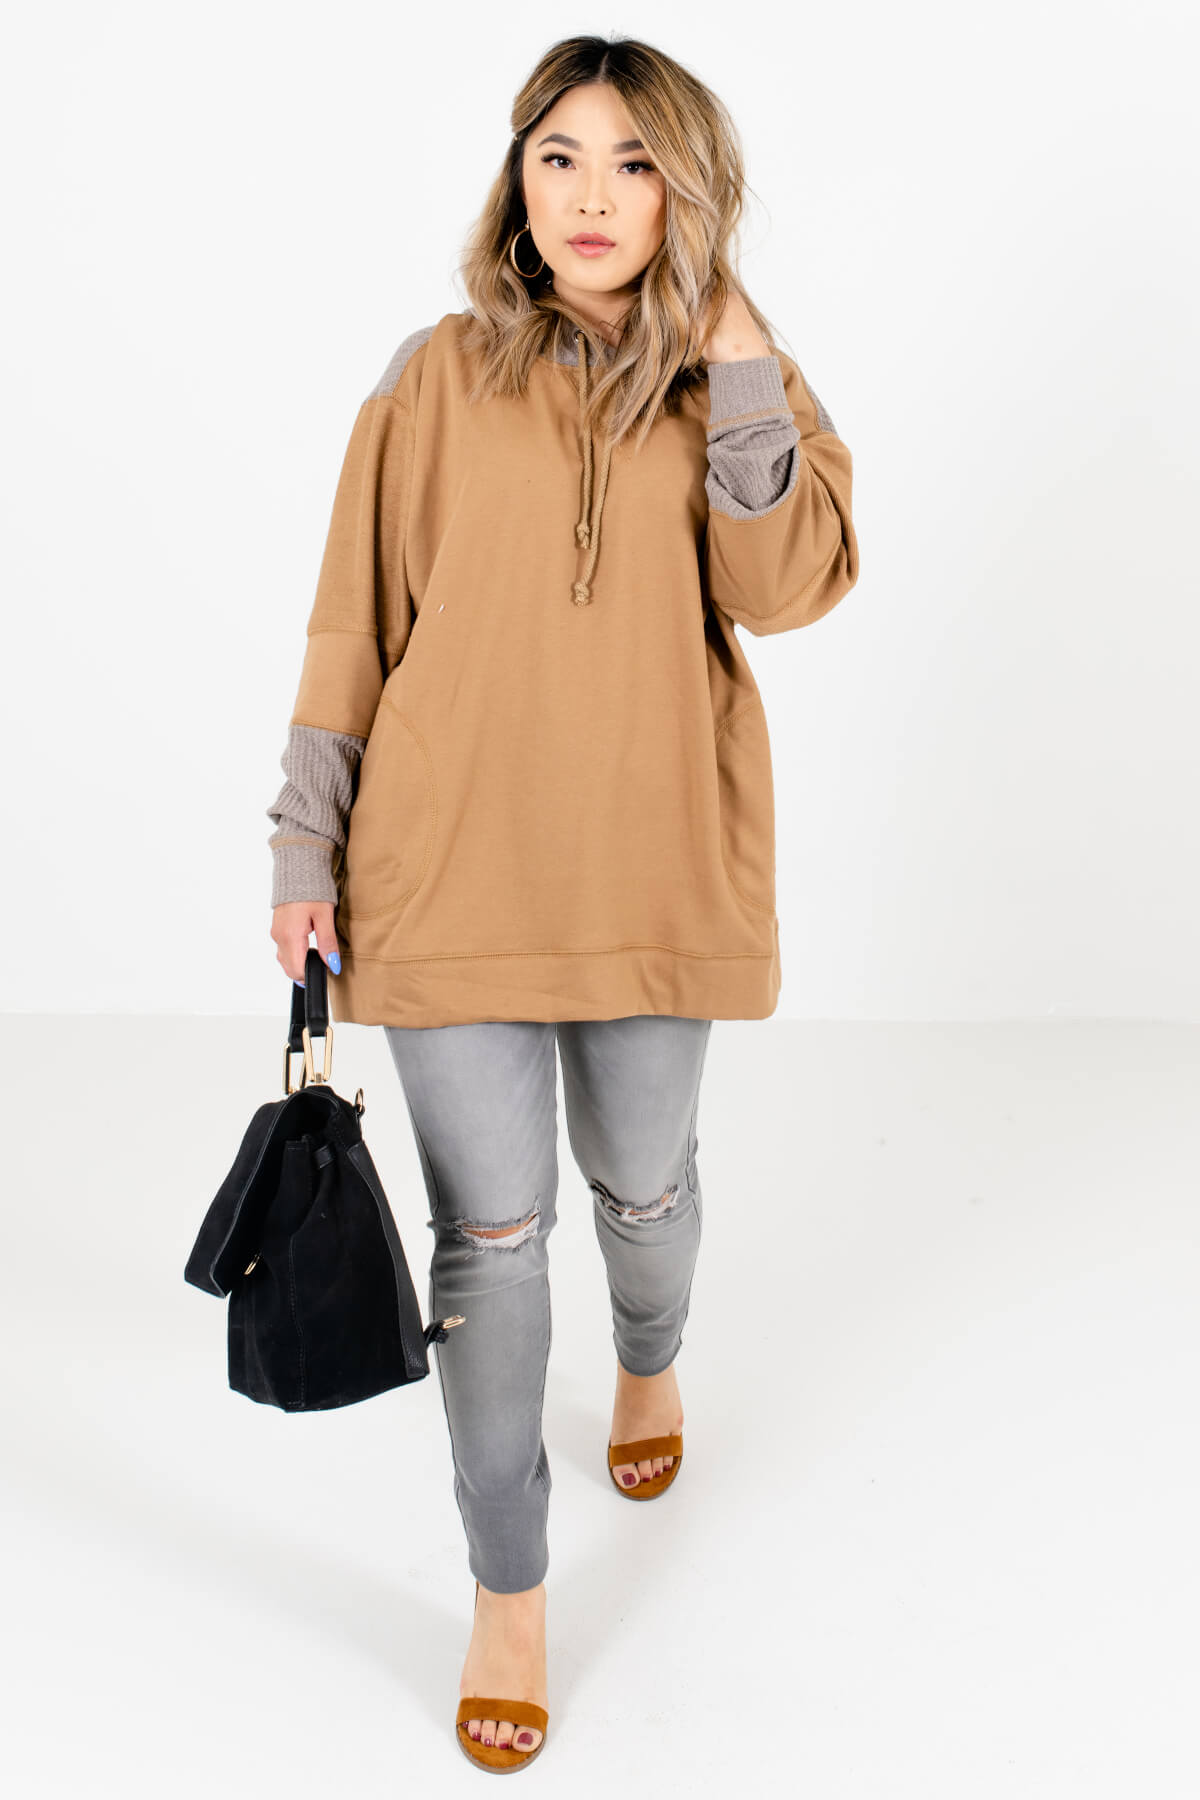 Muted Orange Cute and Comfortable Boutique Hoodies for Women